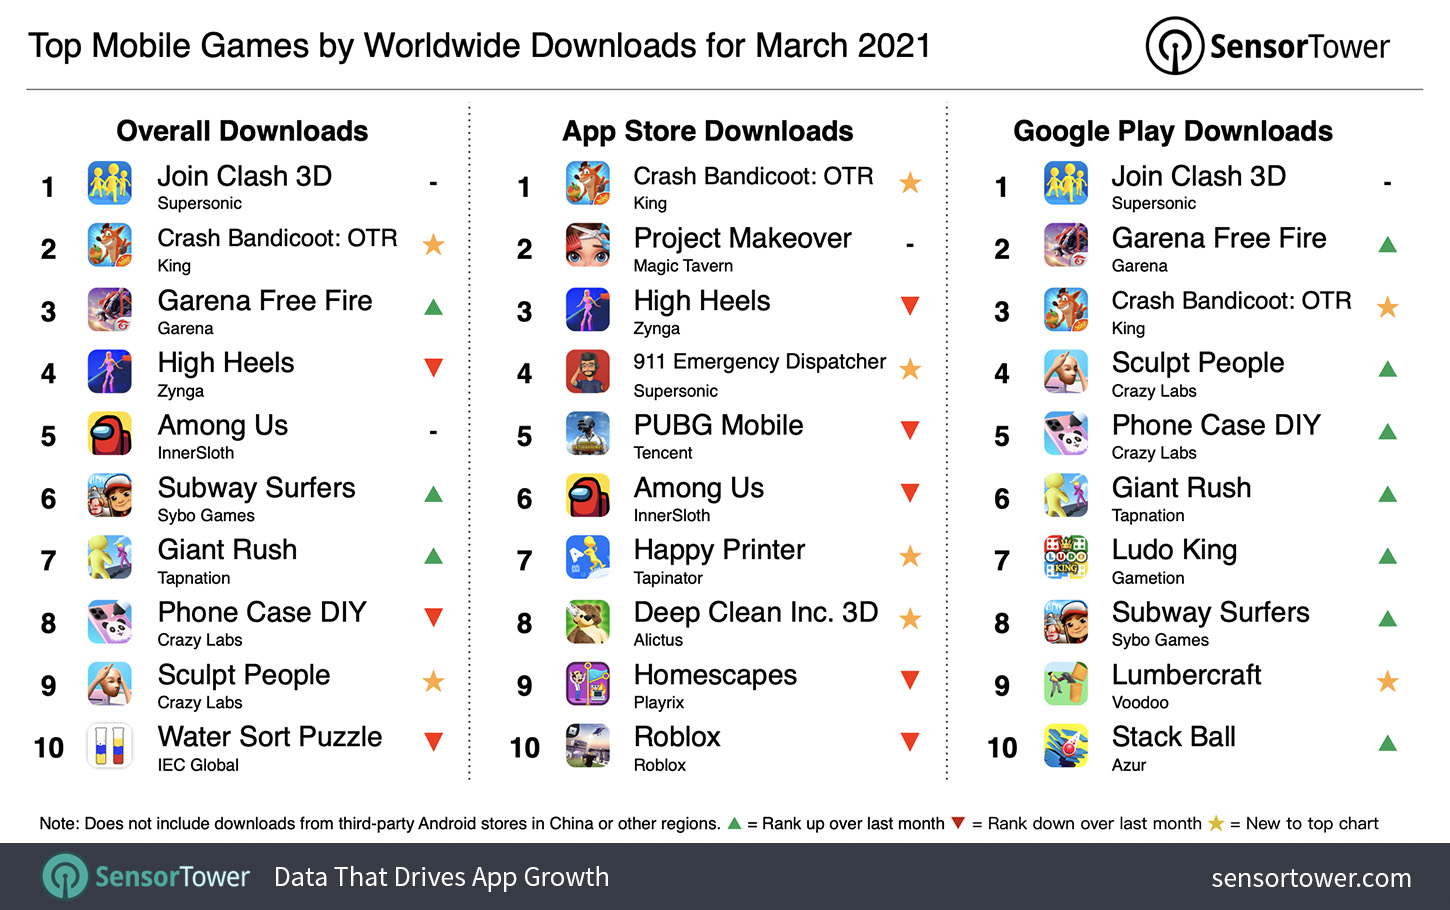 Top Mobile Games Worldwide for March 2021 by Downloads